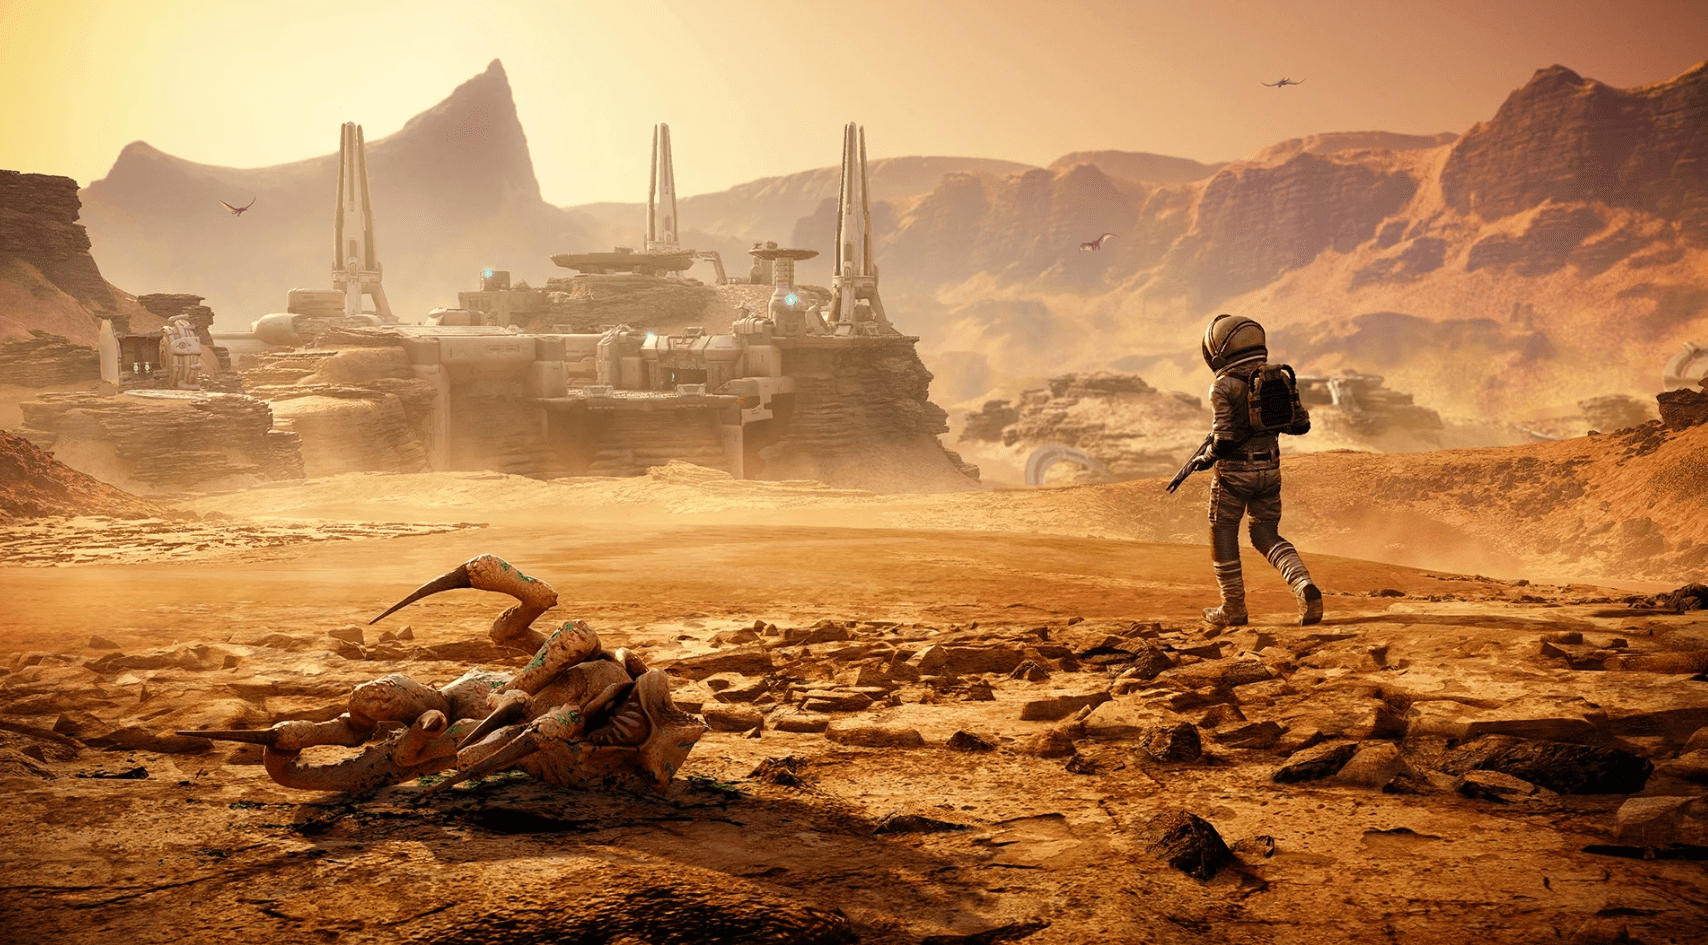 Far Cry 5 goes intergalactic when Lost on Mars DLC frops next week